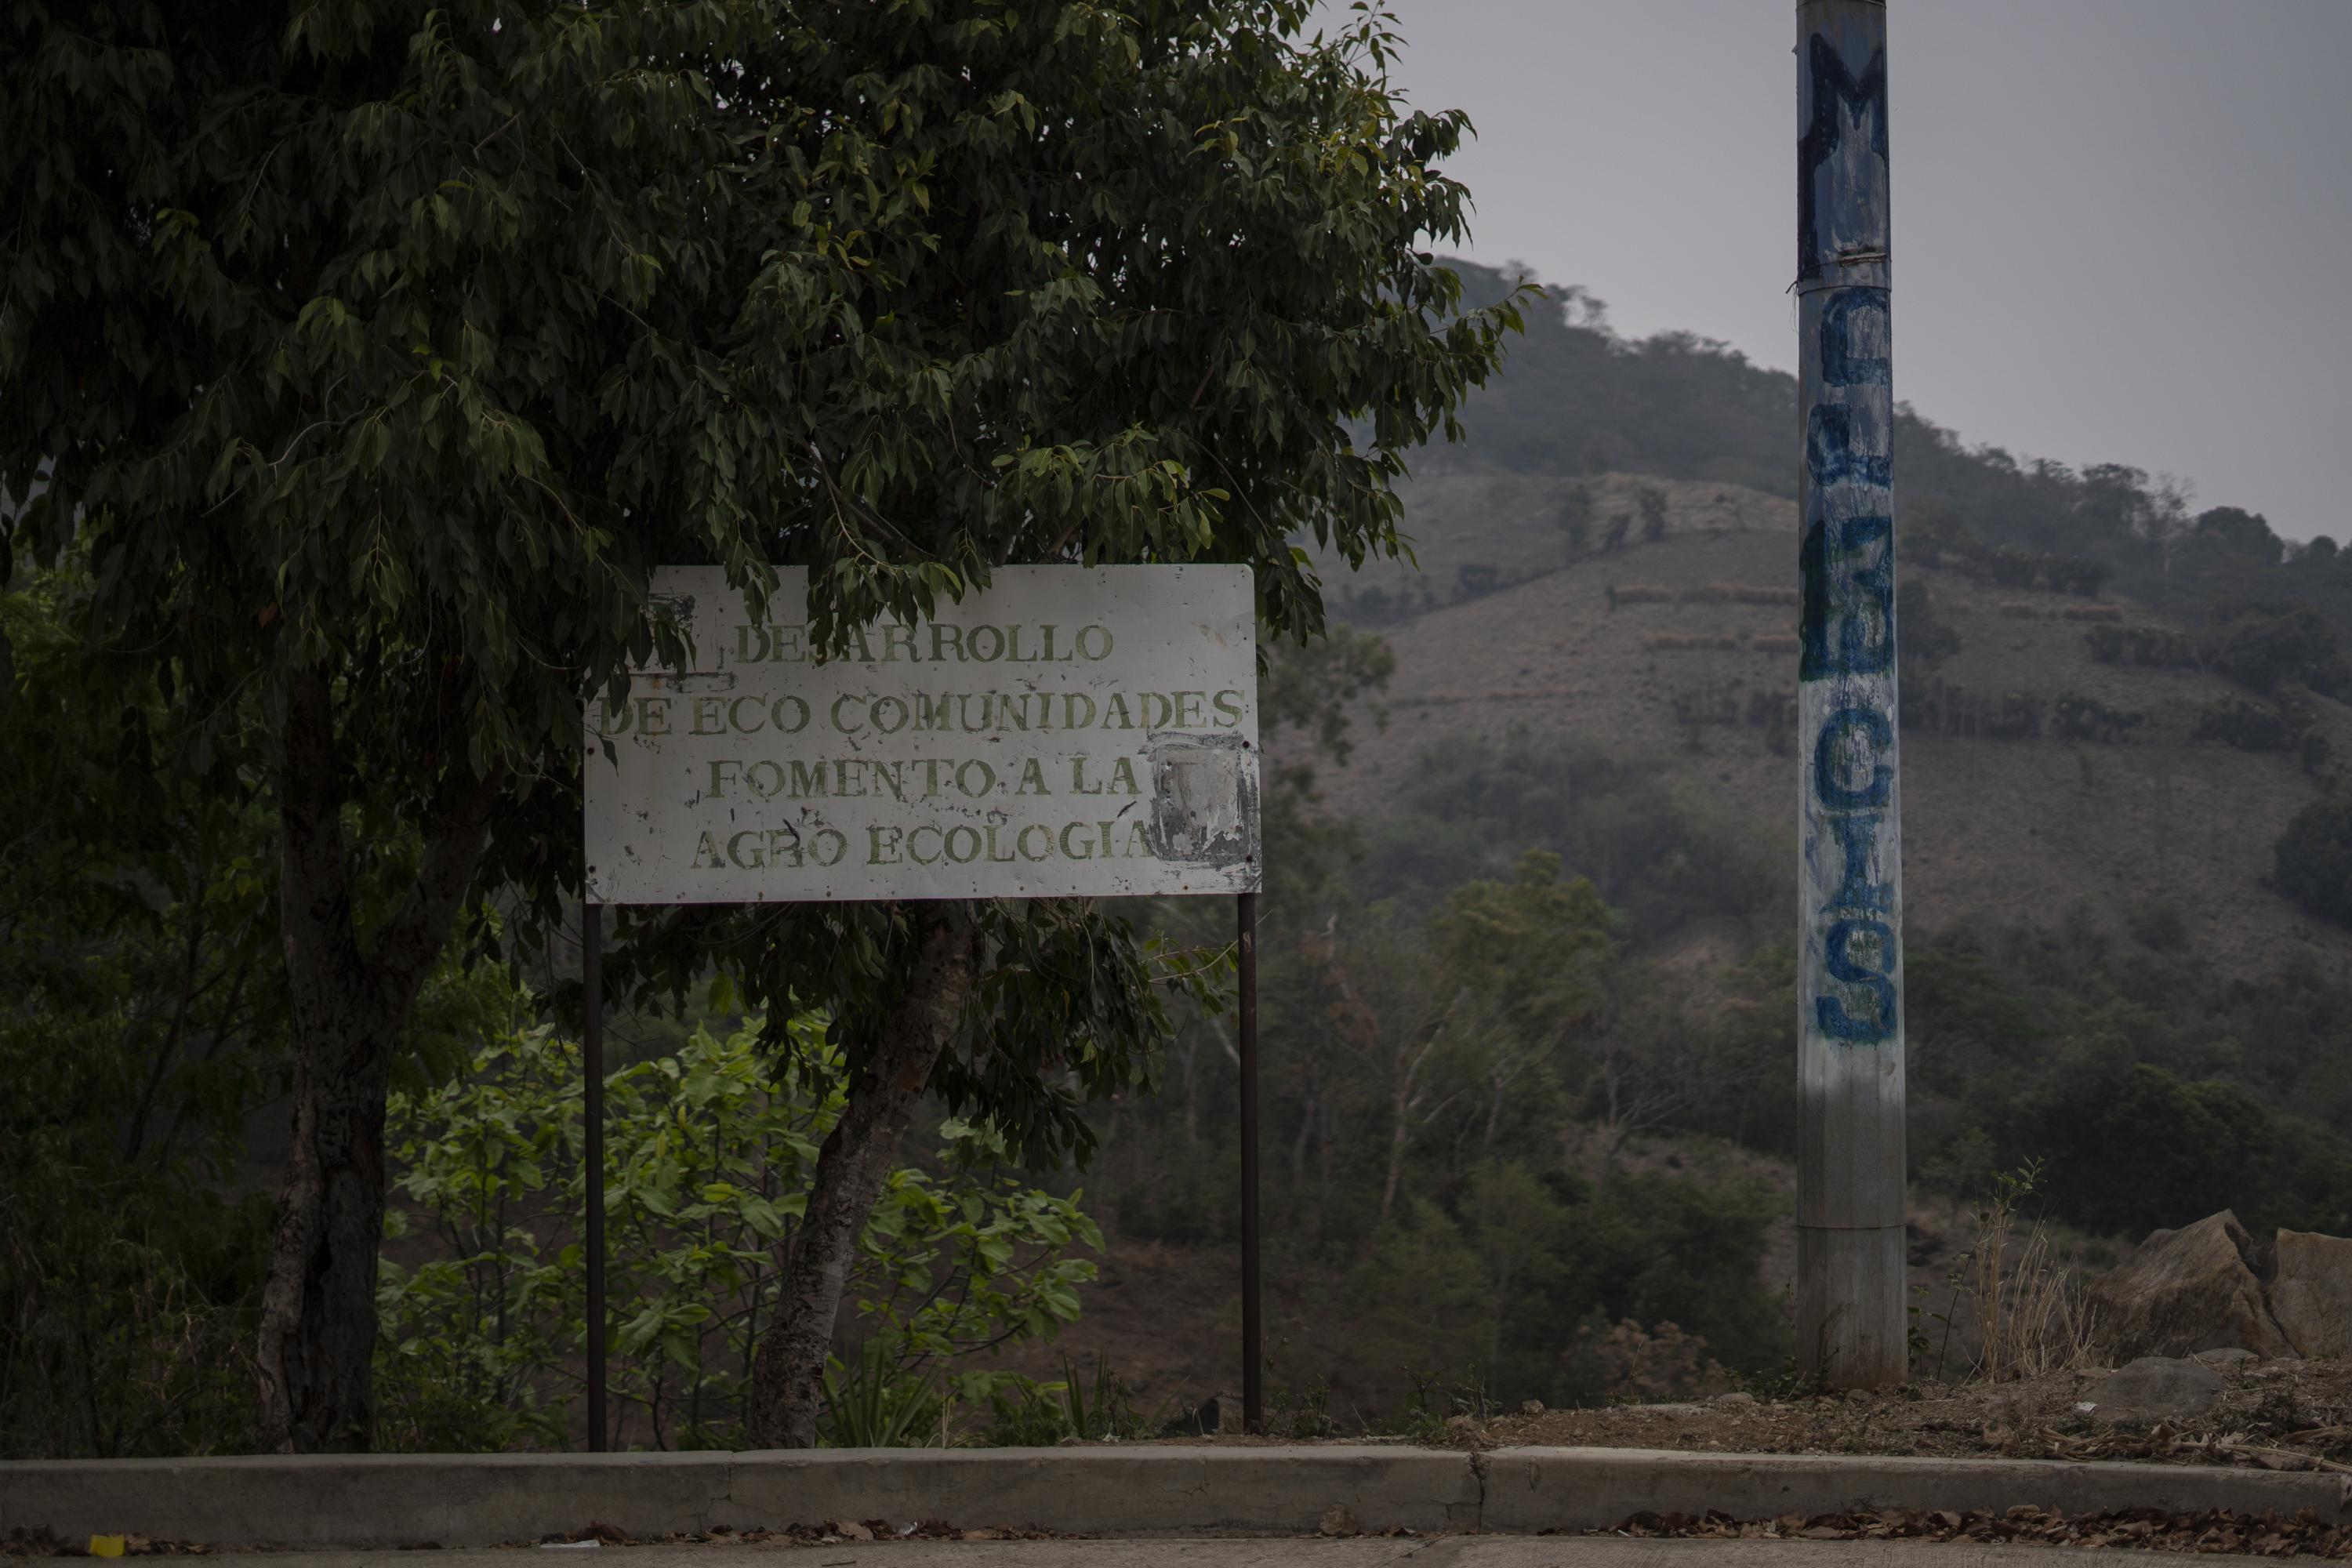 The control that MS-13 maintained over the community of El Jícaro can still be seen throughout the municipality of Tacuba. This location was the scene of multiple murders and confrontations between gang members and police. Photo Víctor Peña